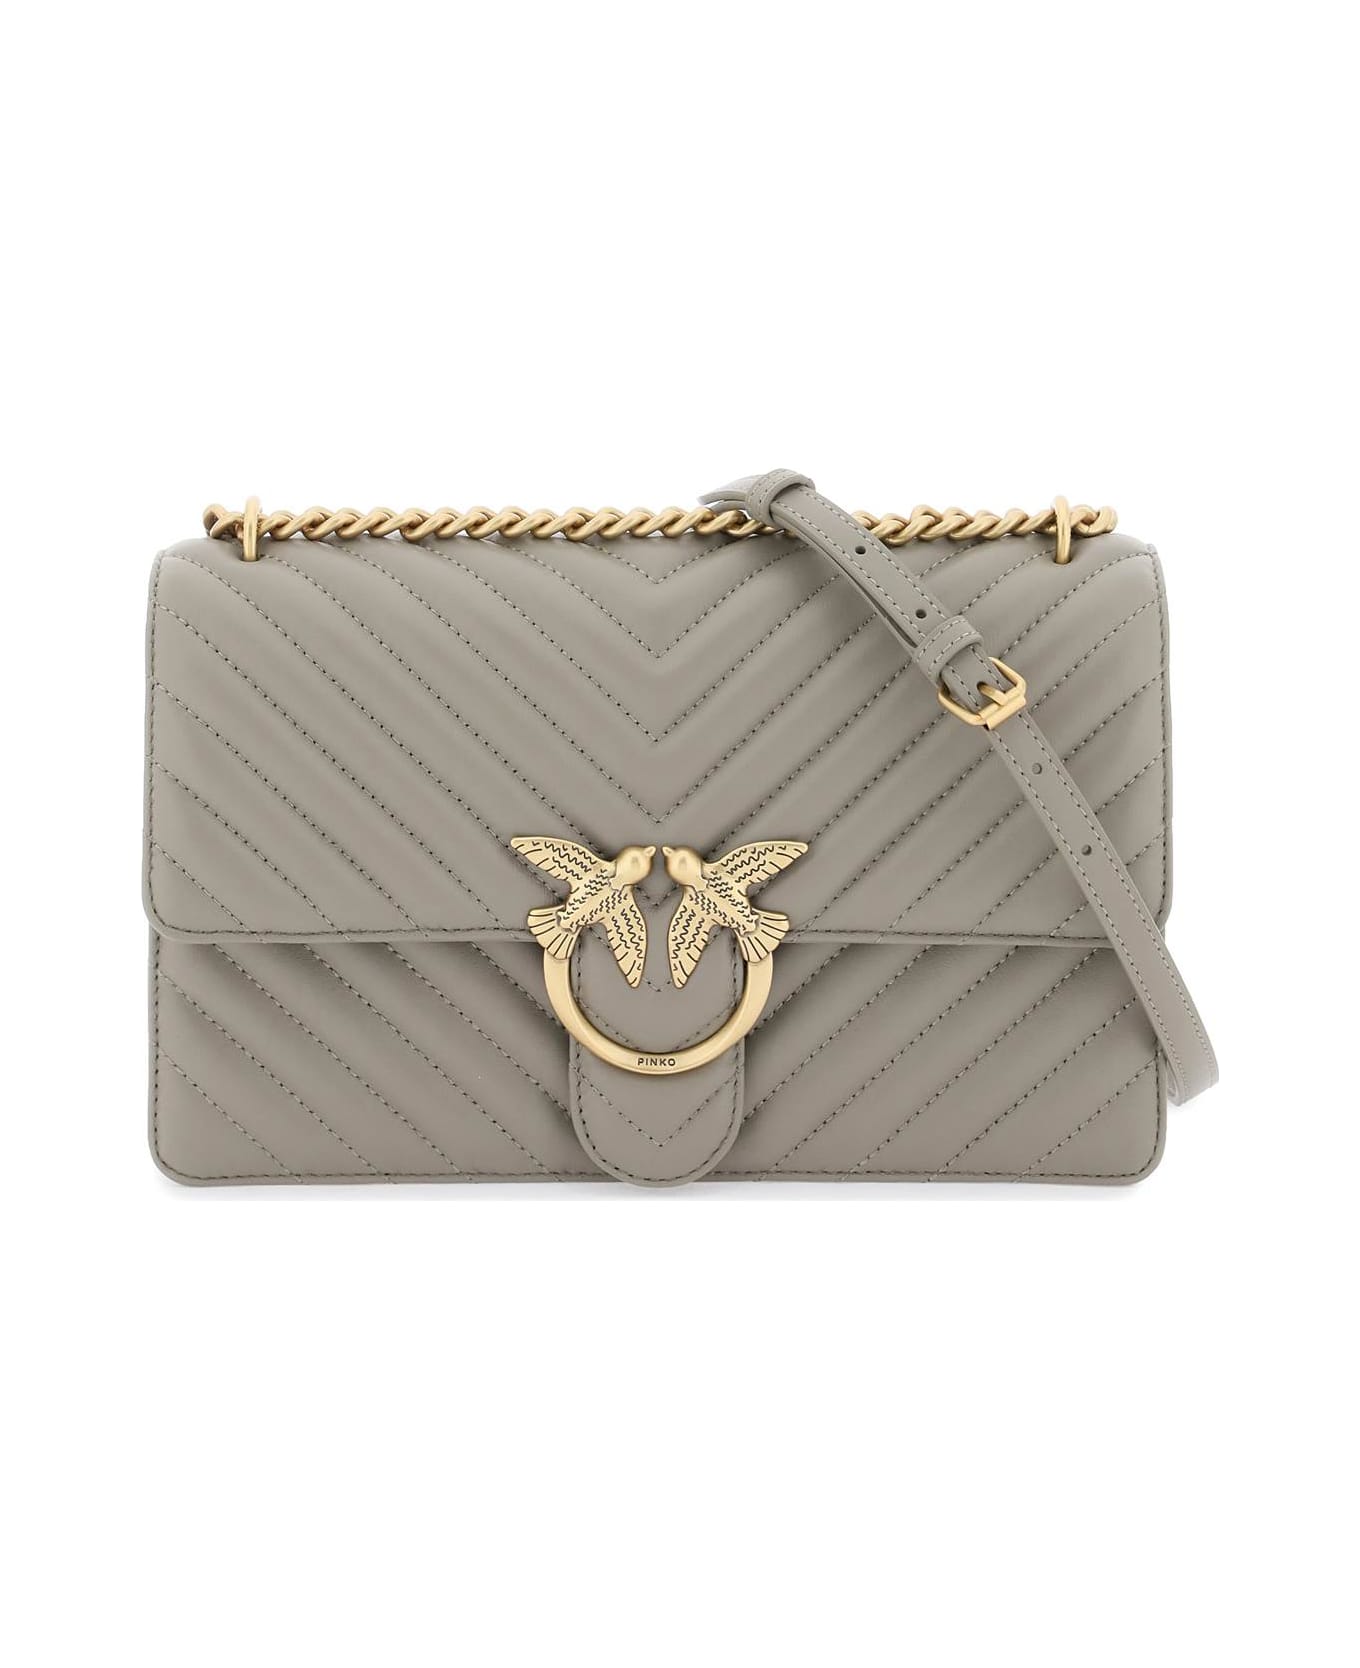 Pinko Classic Love Bag One - Noce-antique Gold